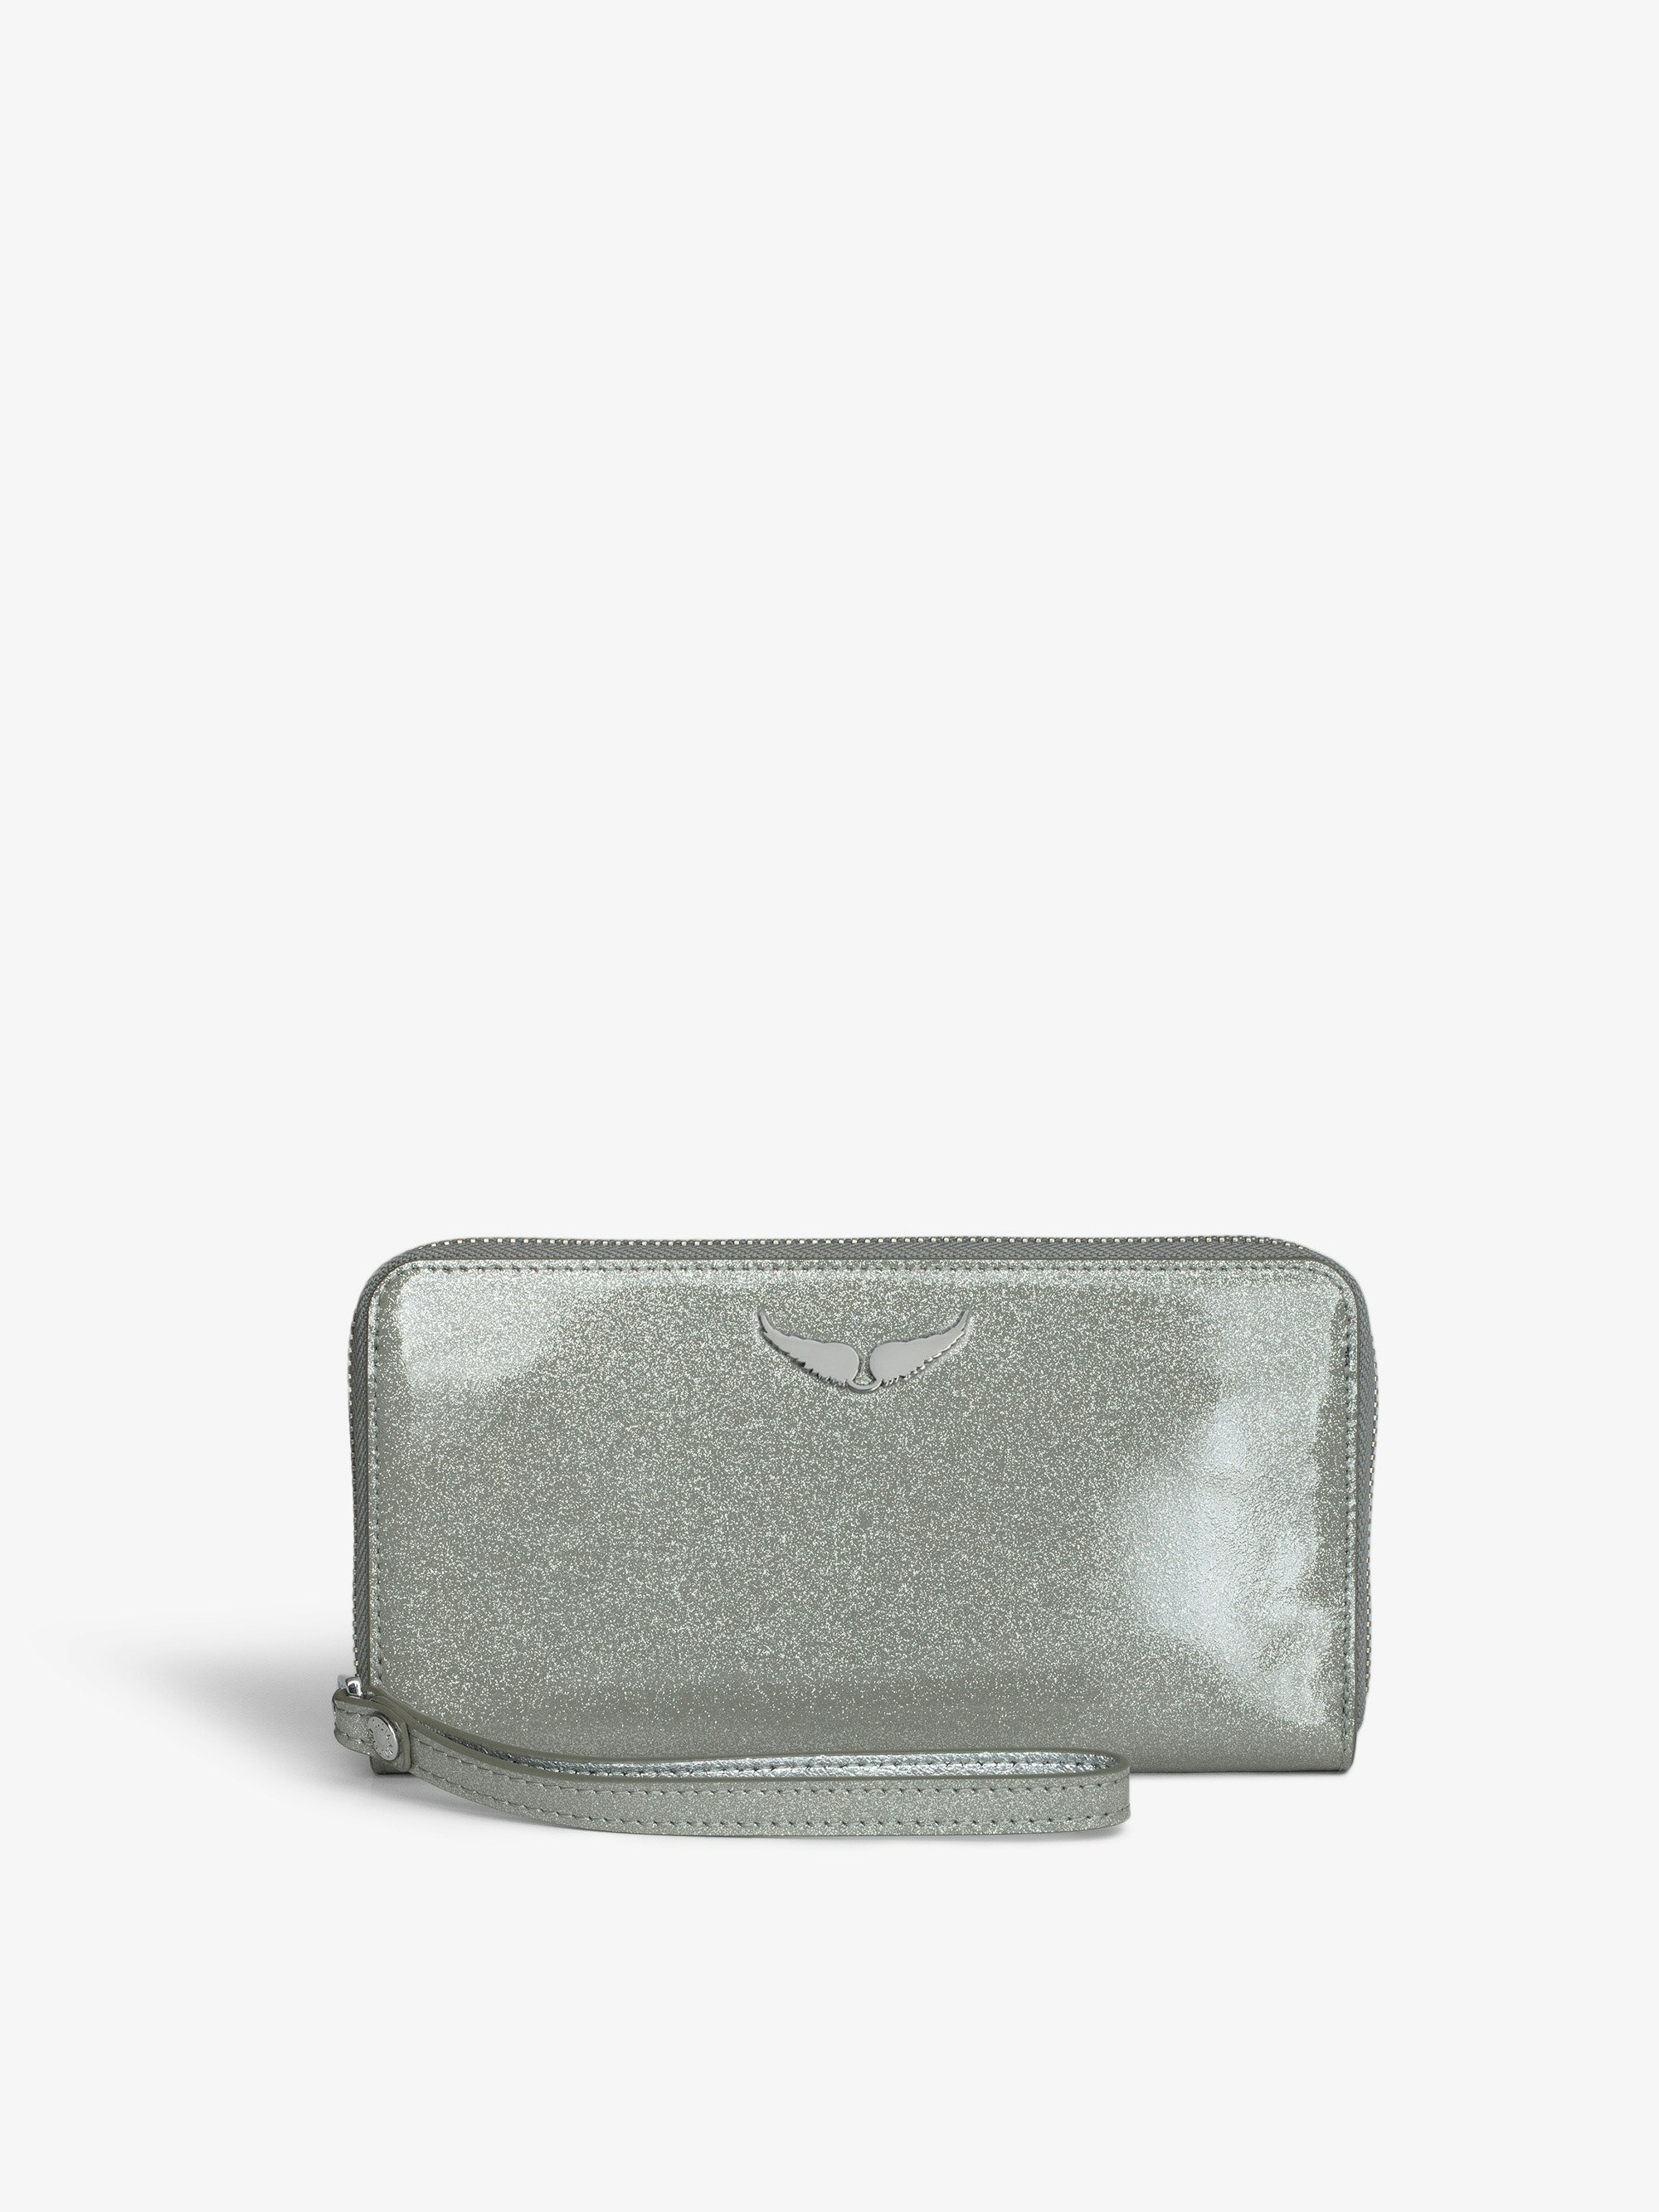 Compagnon Infinity Patent Wallet - Women’s silver glitter patent leather wallet with wristlet and wings charm.